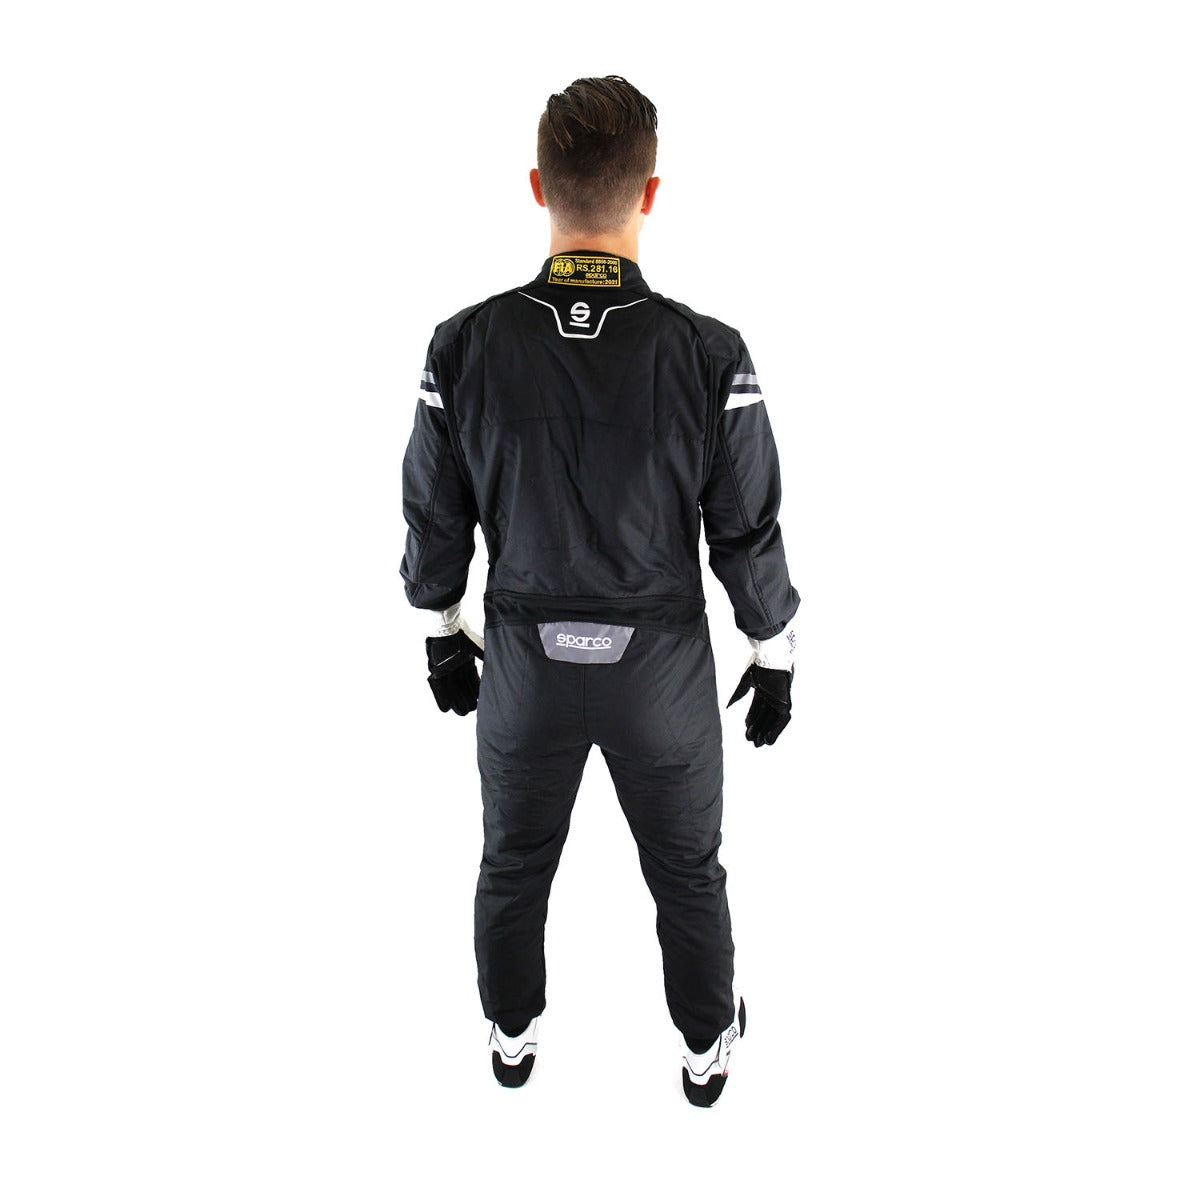 Sparco Prime LT Race Suit - Limited Edition Black Rear Will Ringwelski Image